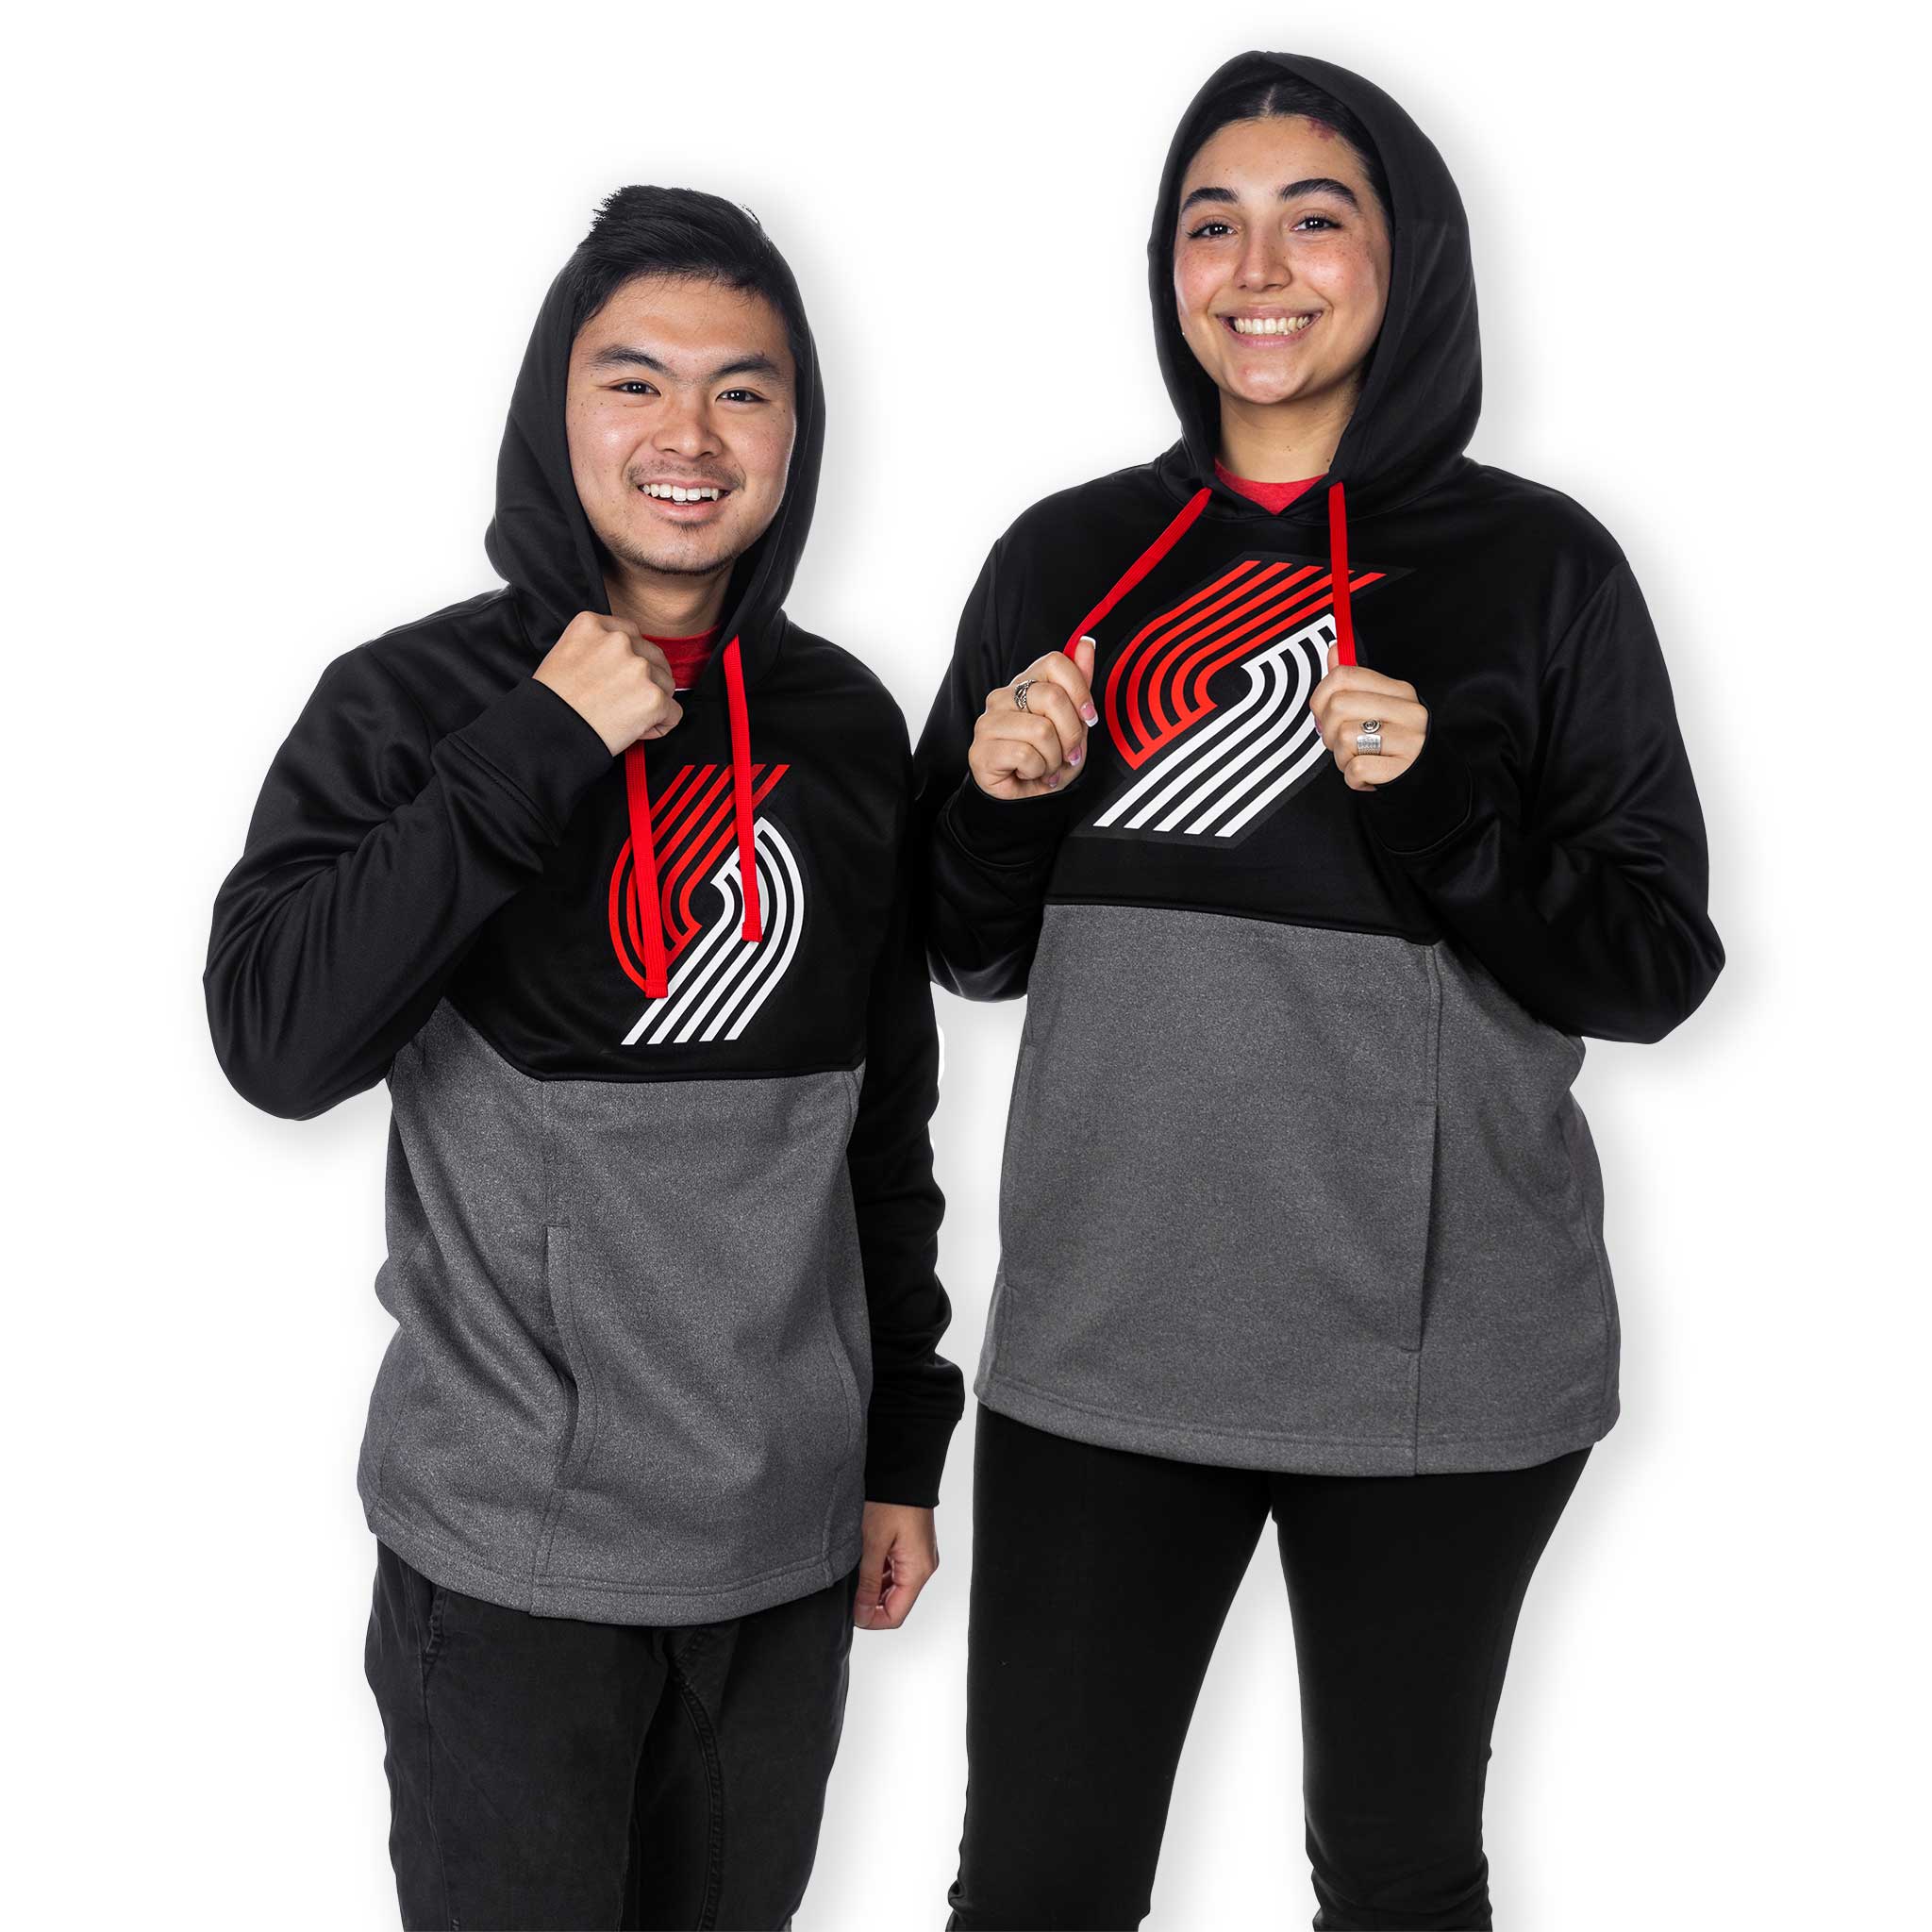 Show Your Support for the Trail Blazers with Stylish Hoodies and